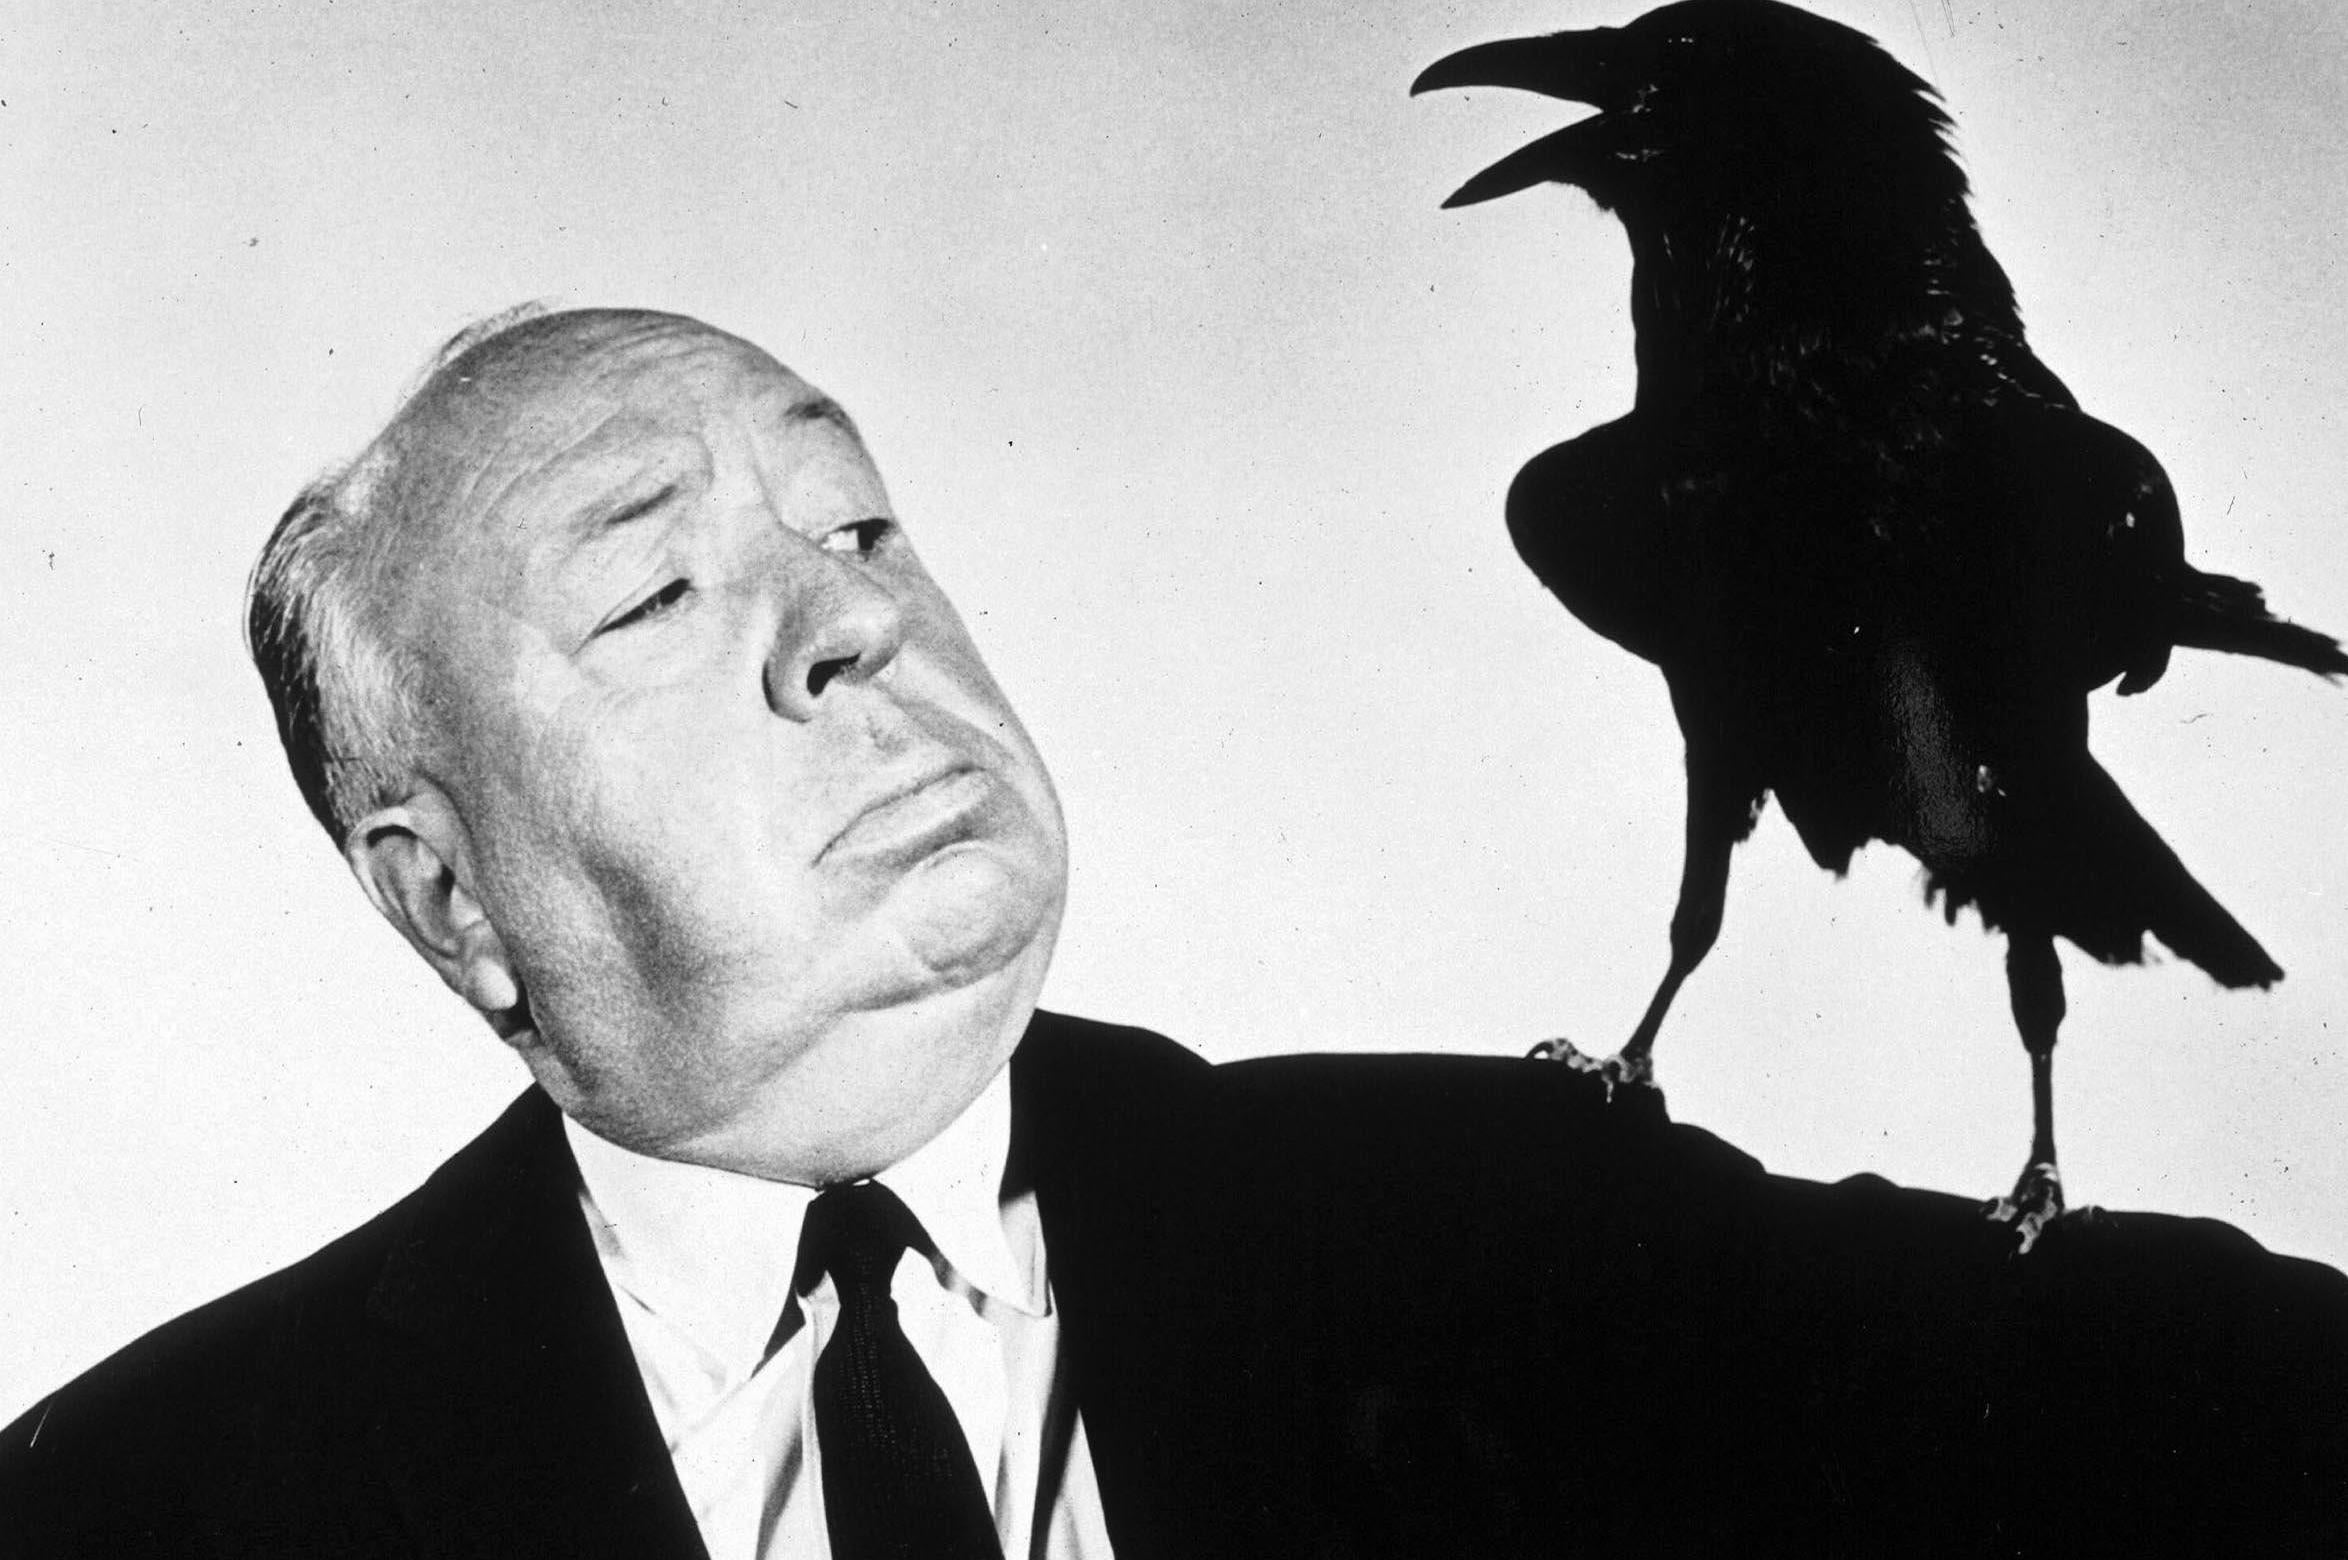 Alfred Hitchcock S 20 Greatest Films From Rebecca To The Birds The Independent